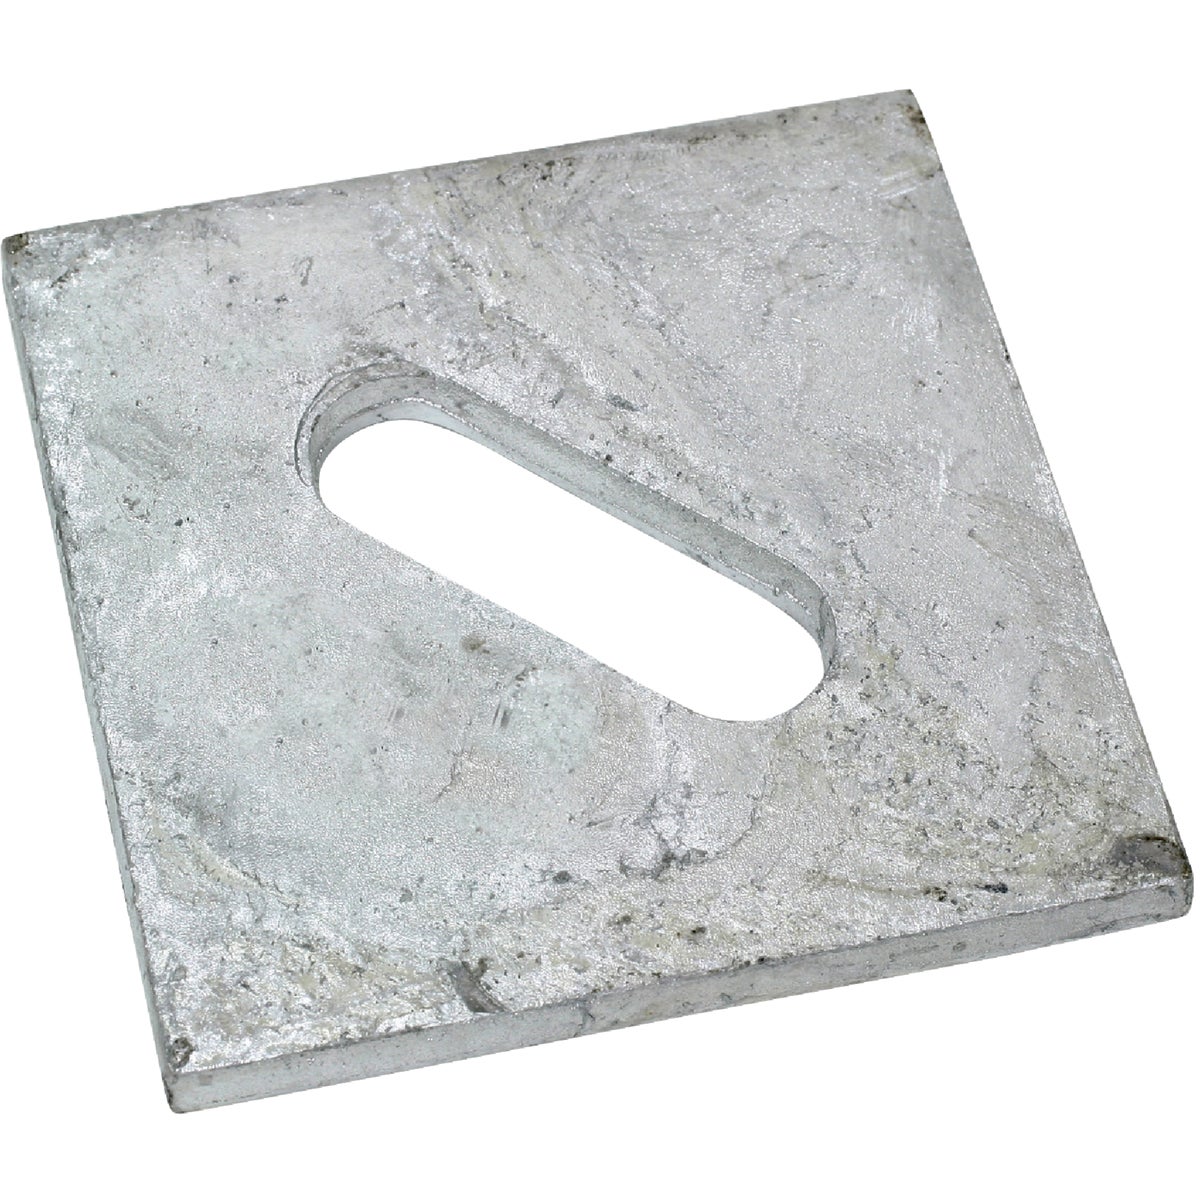 Simpson Strong-Tie 1/2 in. x 3 in. Steel Hot Dipped Galvanized Slotted Bearing Plate